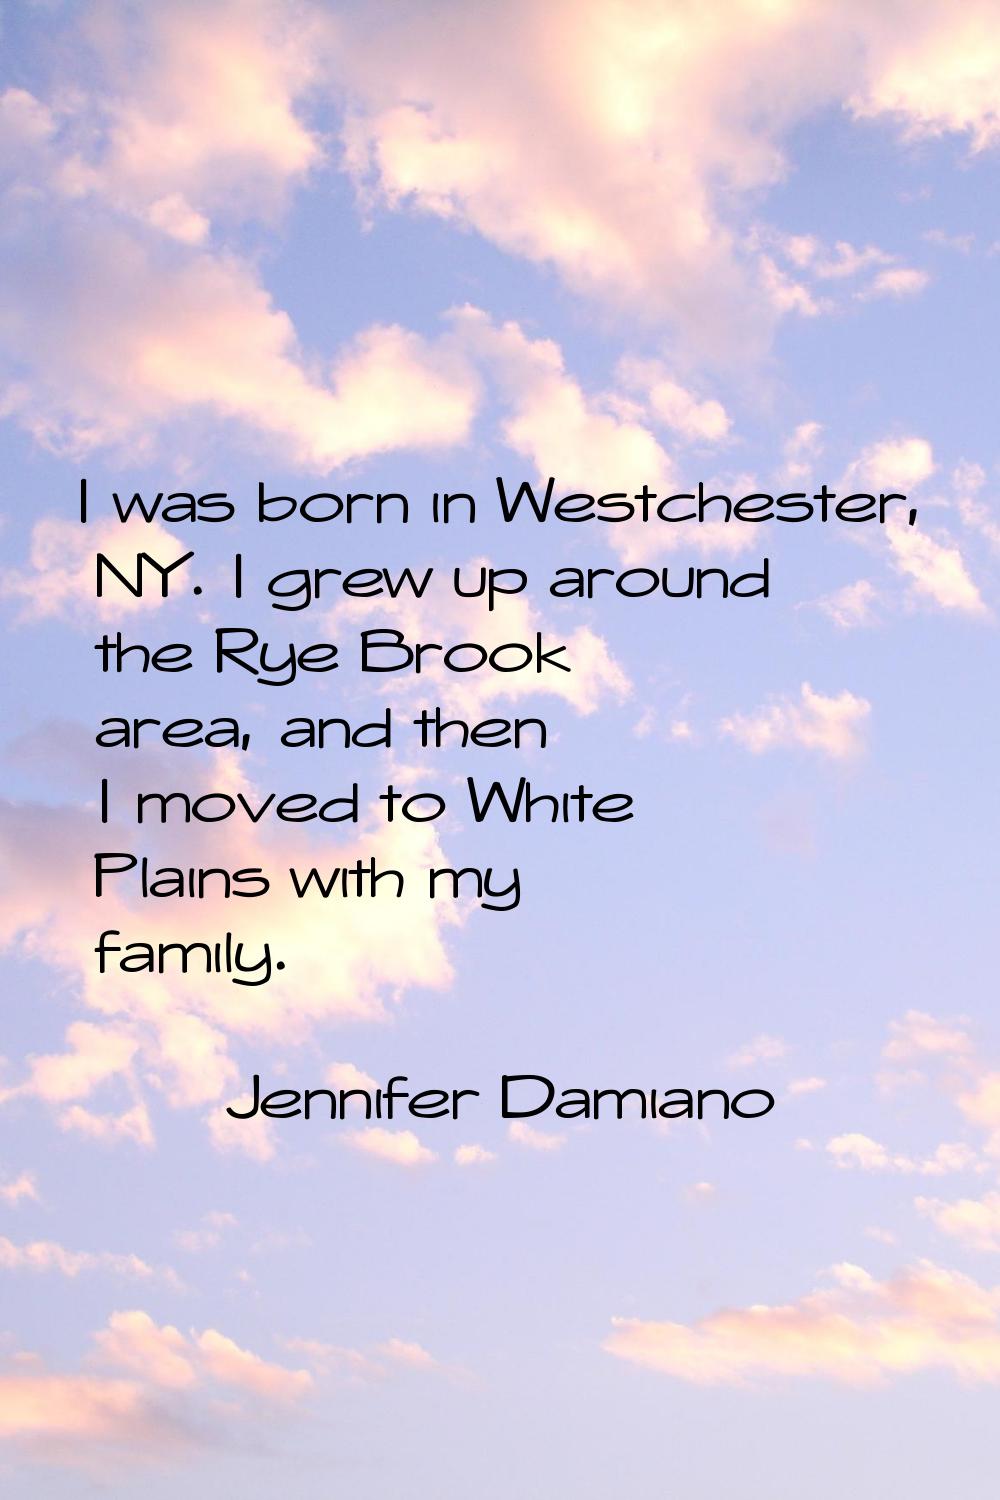 I was born in Westchester, NY. I grew up around the Rye Brook area, and then I moved to White Plain